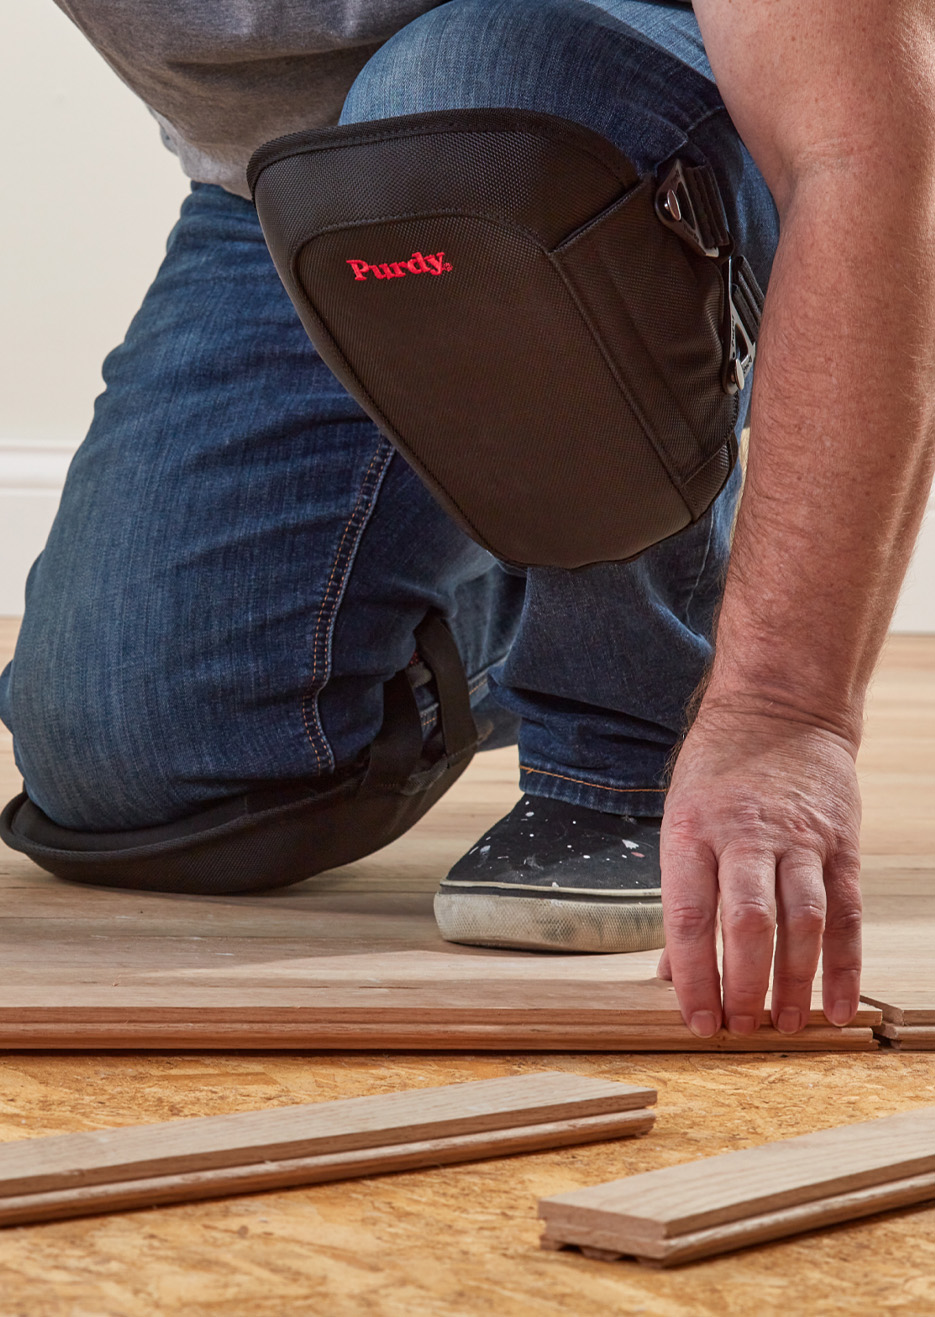 guy using purdy knee pads while holding a hammer